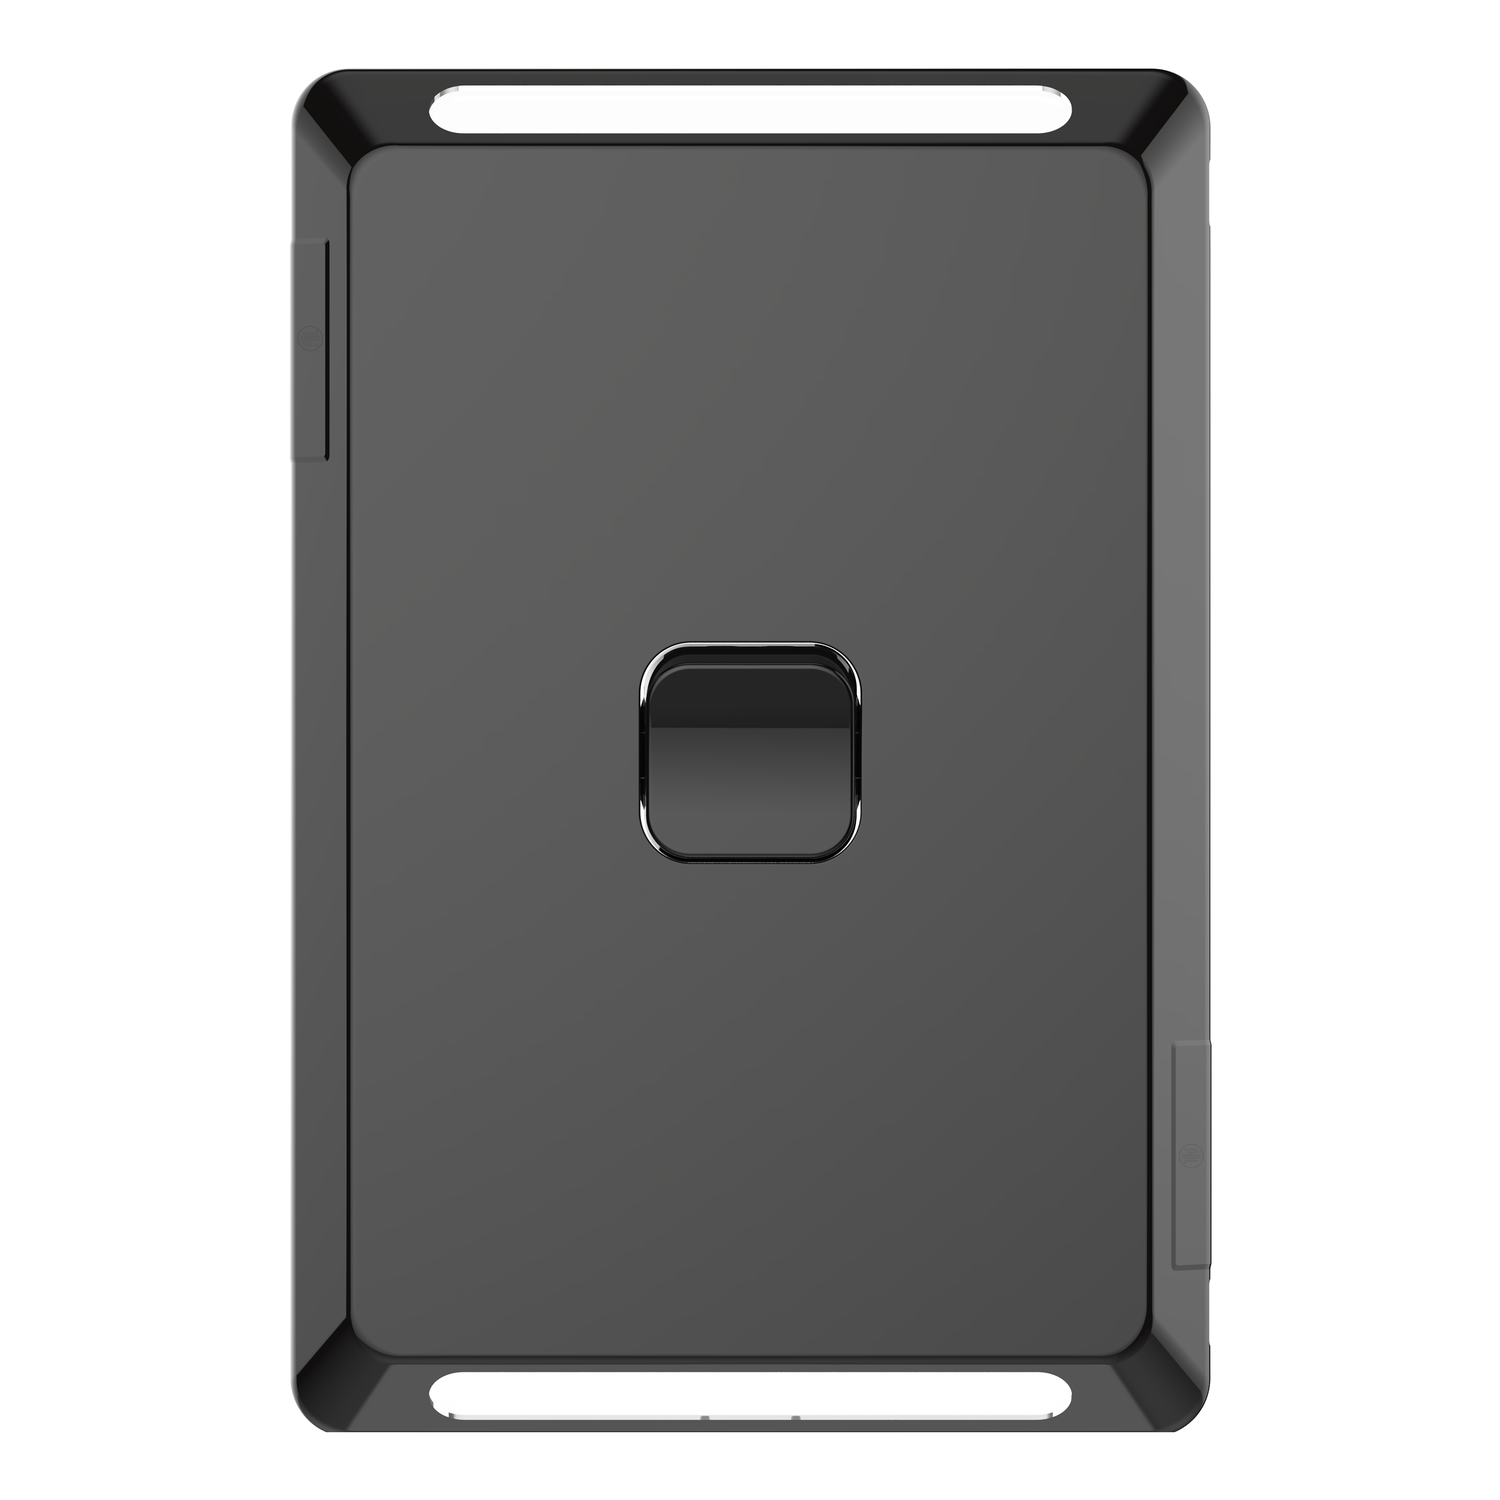 PDL Pro Series - Cover Plate Switch 20A 1-Gang - Black